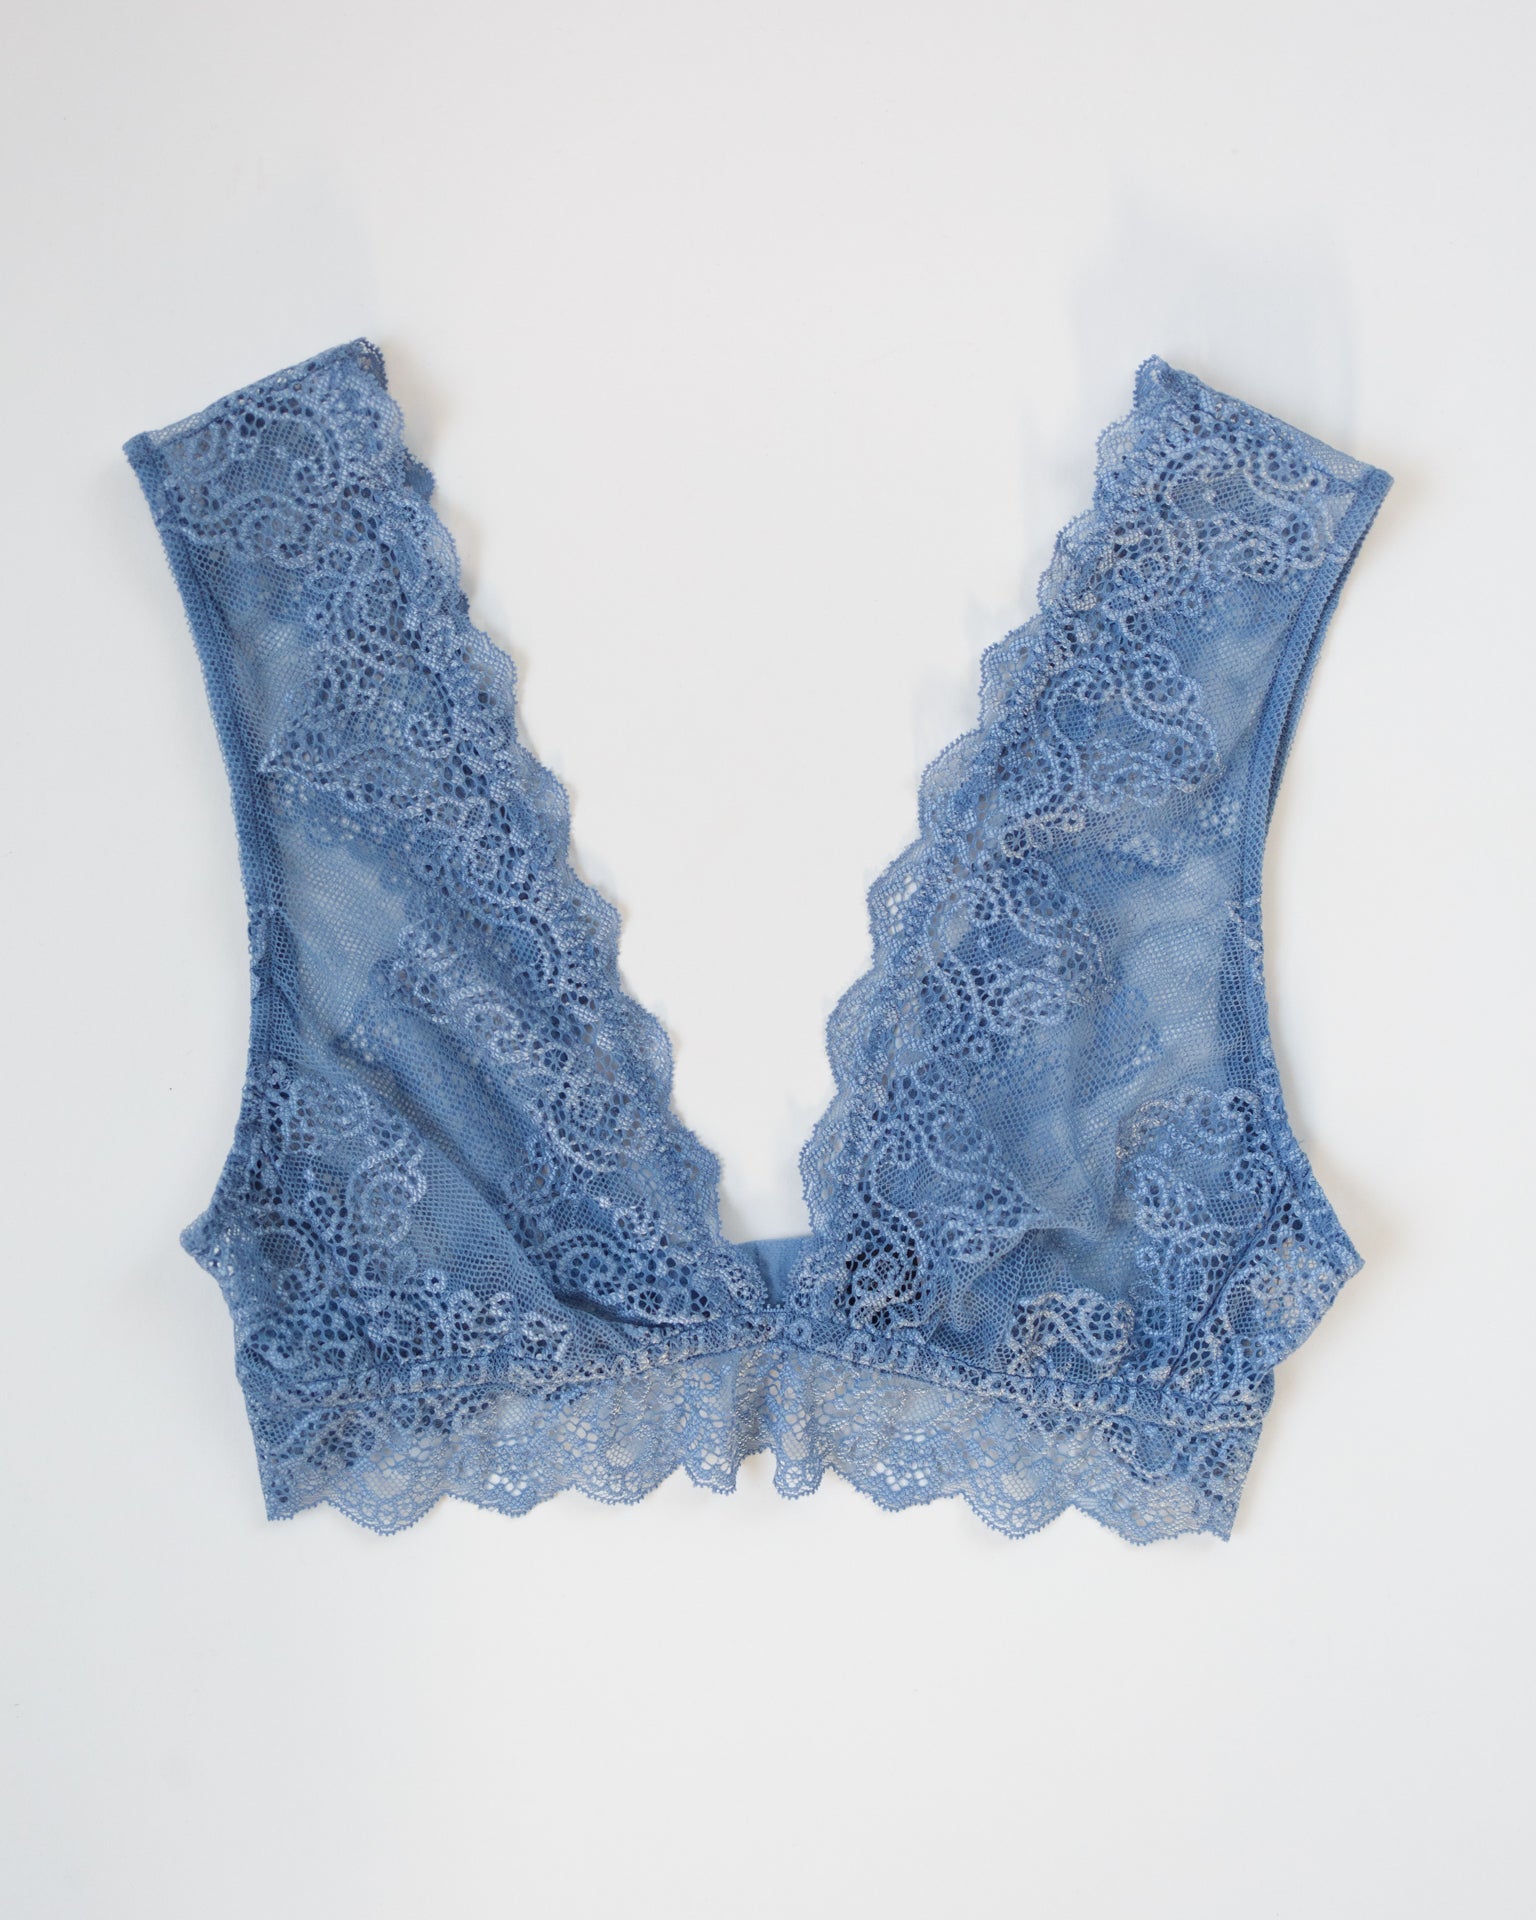 Only Hearts SF w/ Lace Tank Bralette in Blue Smoke - Bliss Boutiques